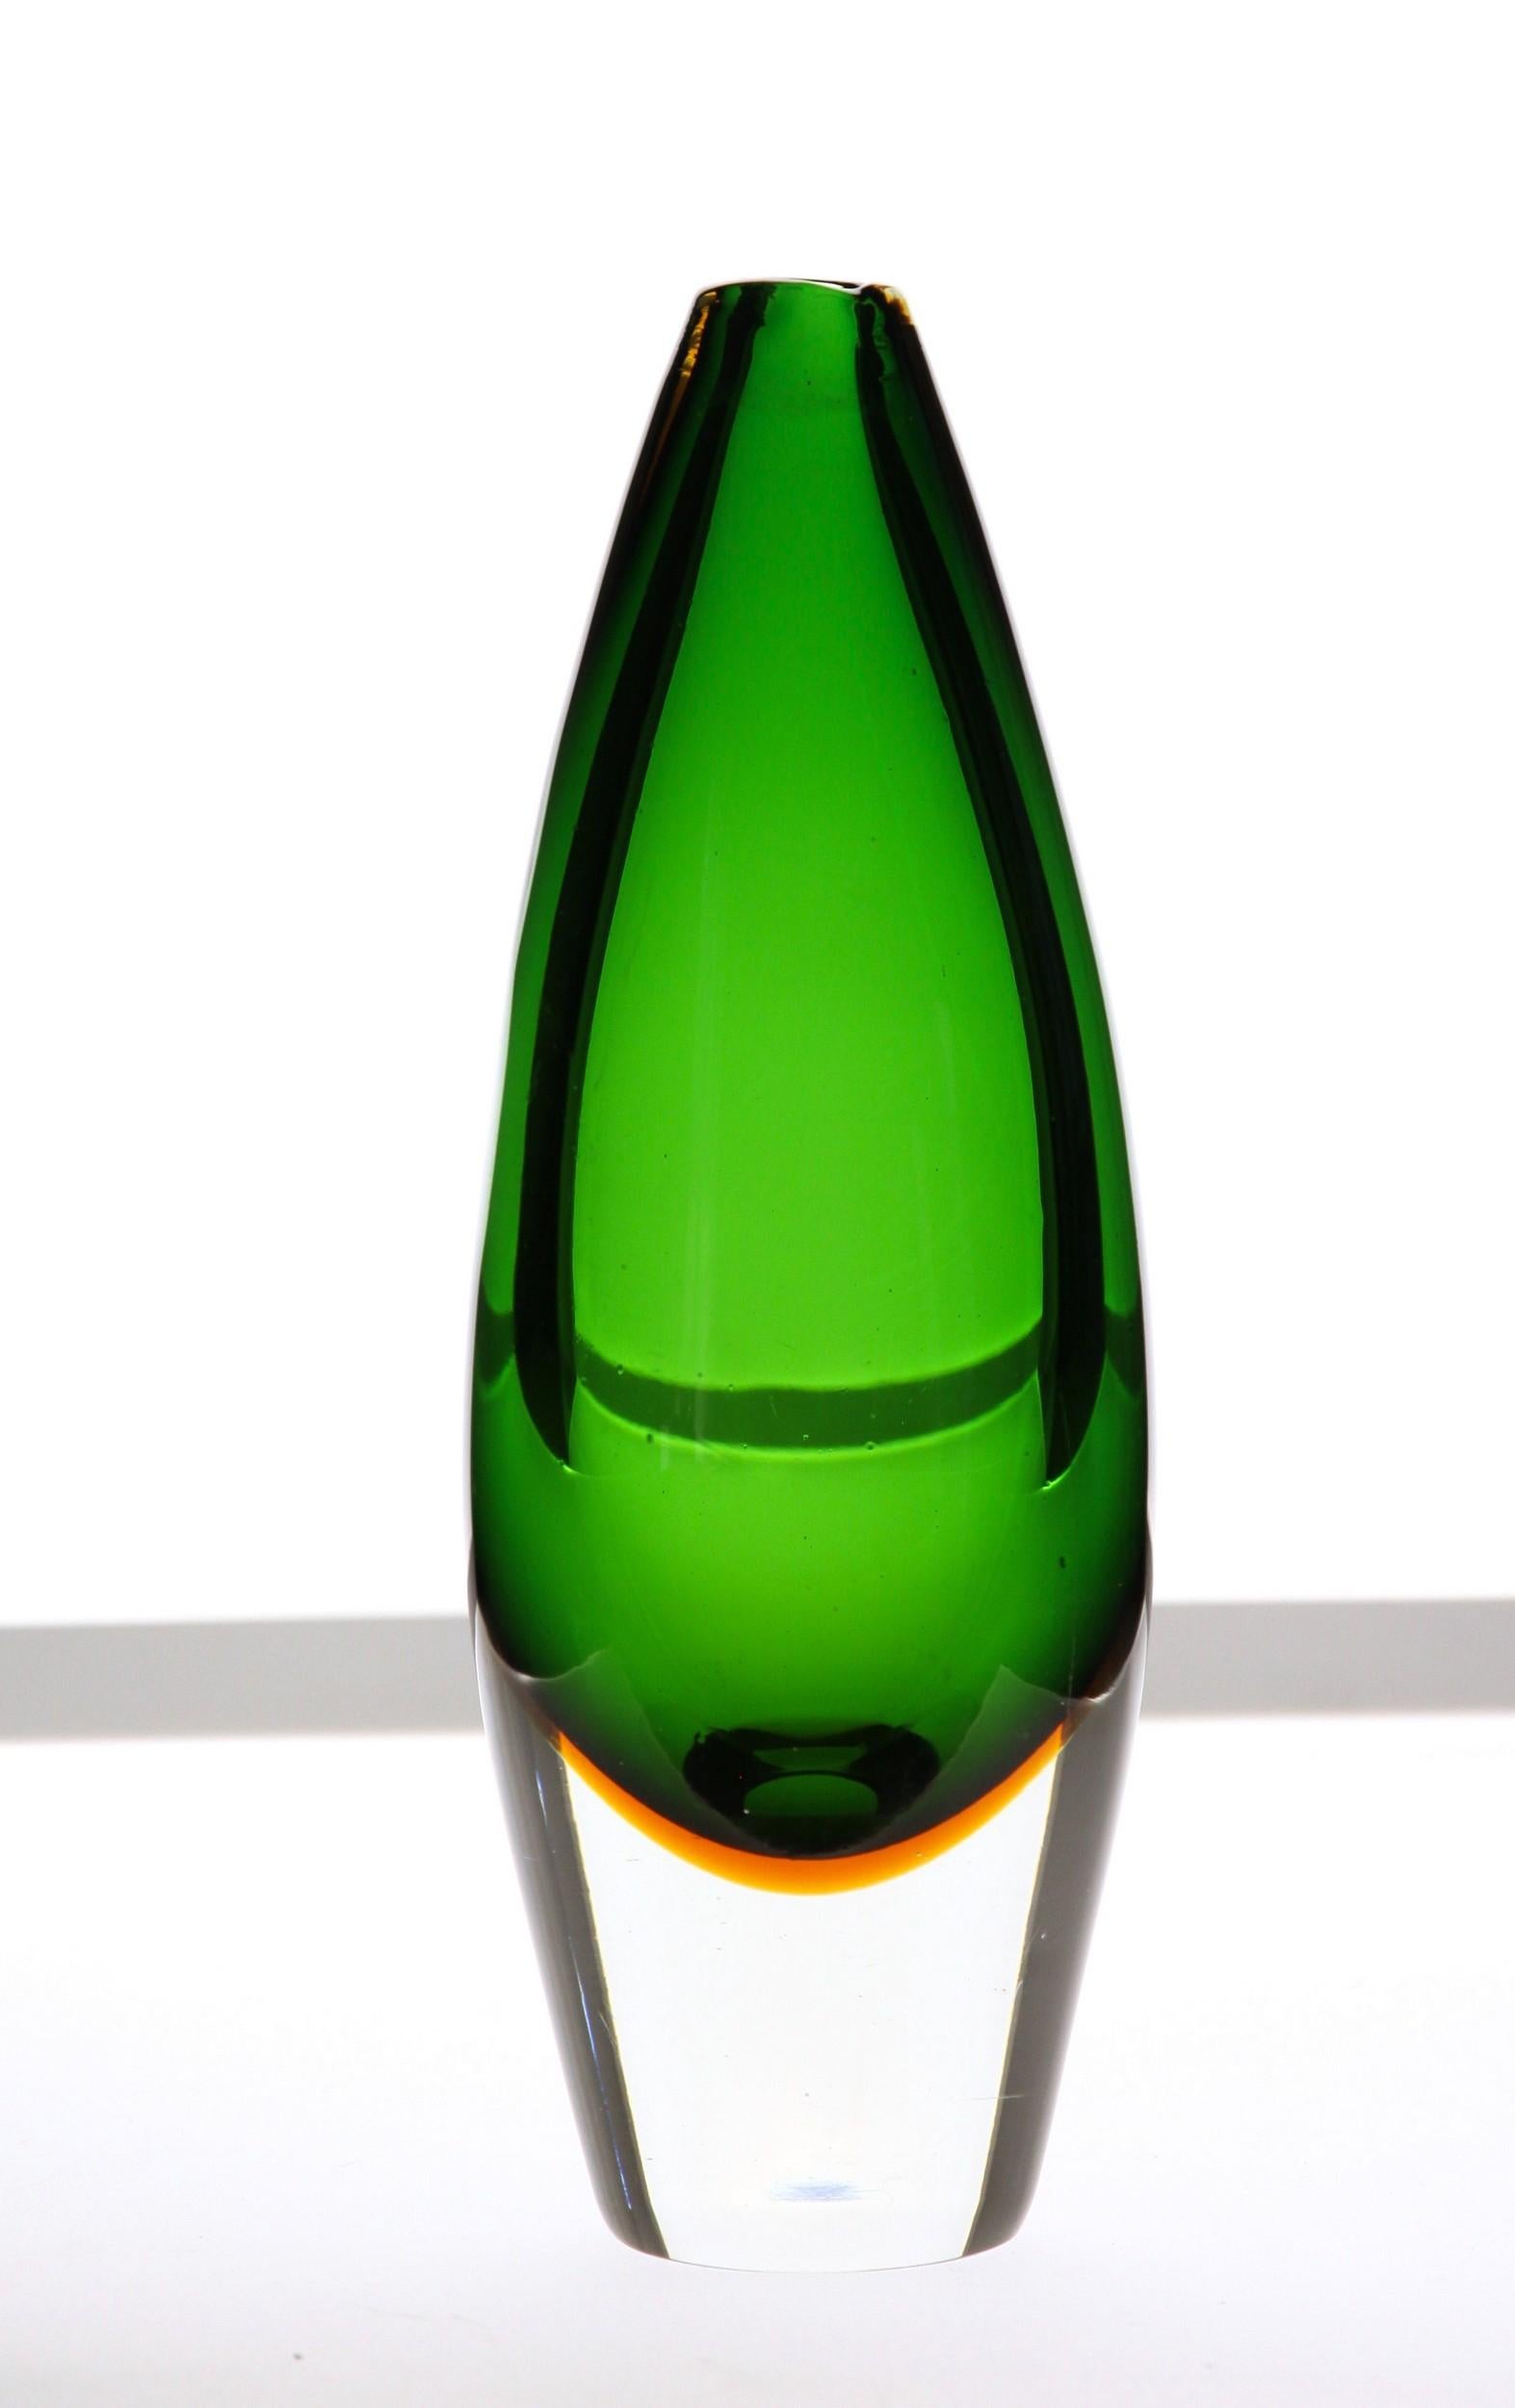 Elegant bud vase in sommerso colors.
Core is in green (could be aquamarine) with an amber casing and a massiccio clear base.
Mouth is spacco naturale, where the breaking point is left natural and rounded with a scalda (reheating to seal).
No